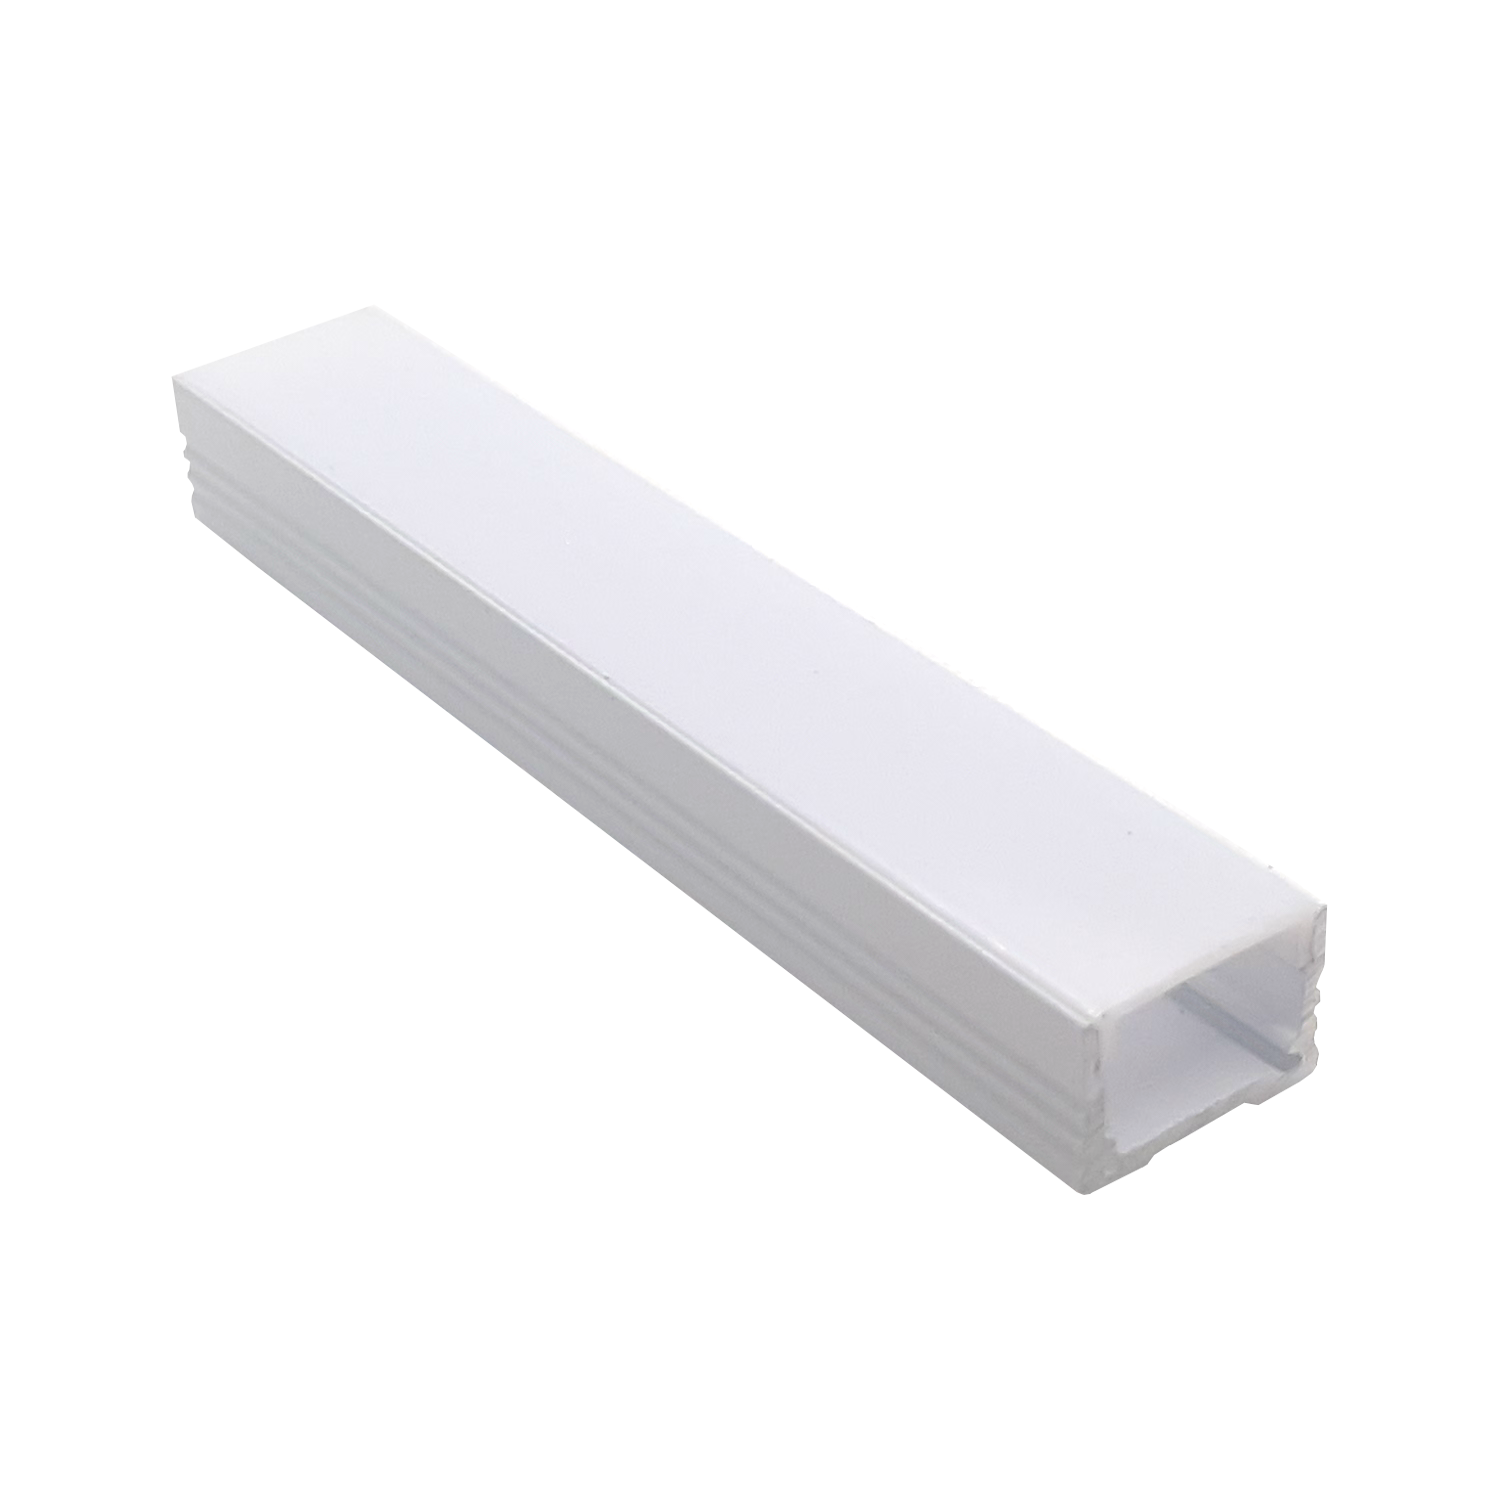 Product image of LXT12 White Deep Extrusion for Dot Free LED strip